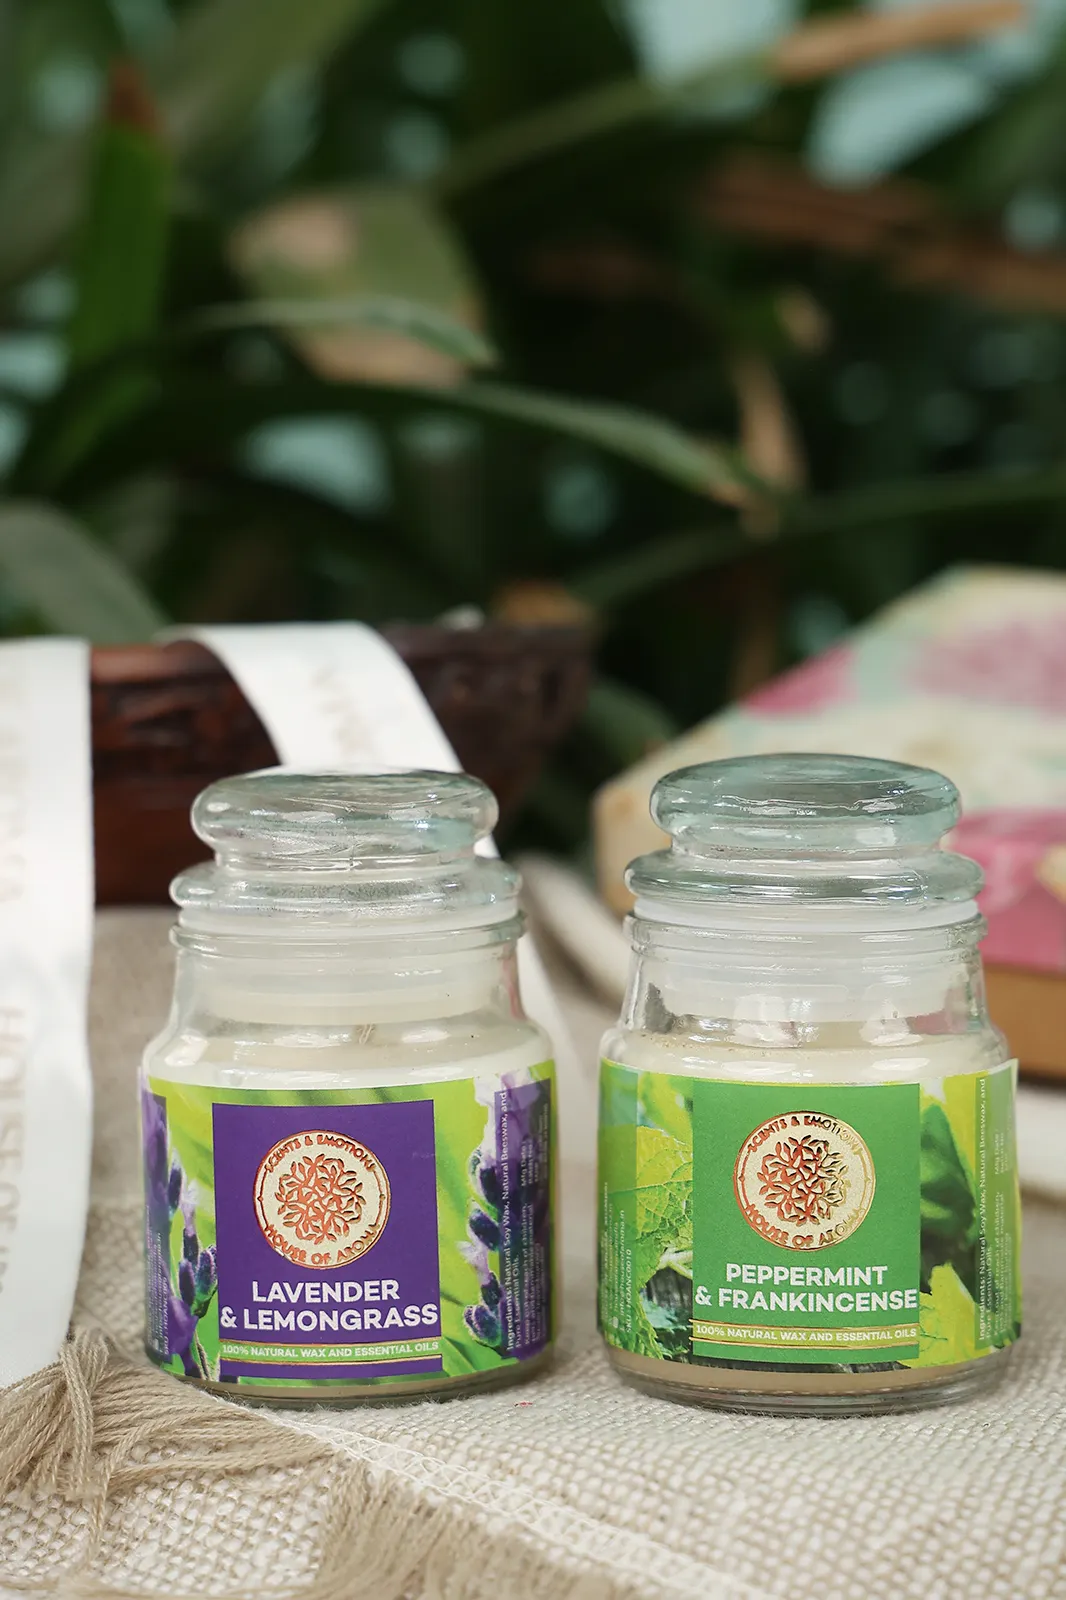 organic scented candles combo pack, organic scented candles, candles with aroma, scented candles pack, scented candles online, scented candles combo, soy candles, bees wax candles, scent soy candles, soy candles online, paraffin wax candles, wax candles, candles with aroma, house of aroma